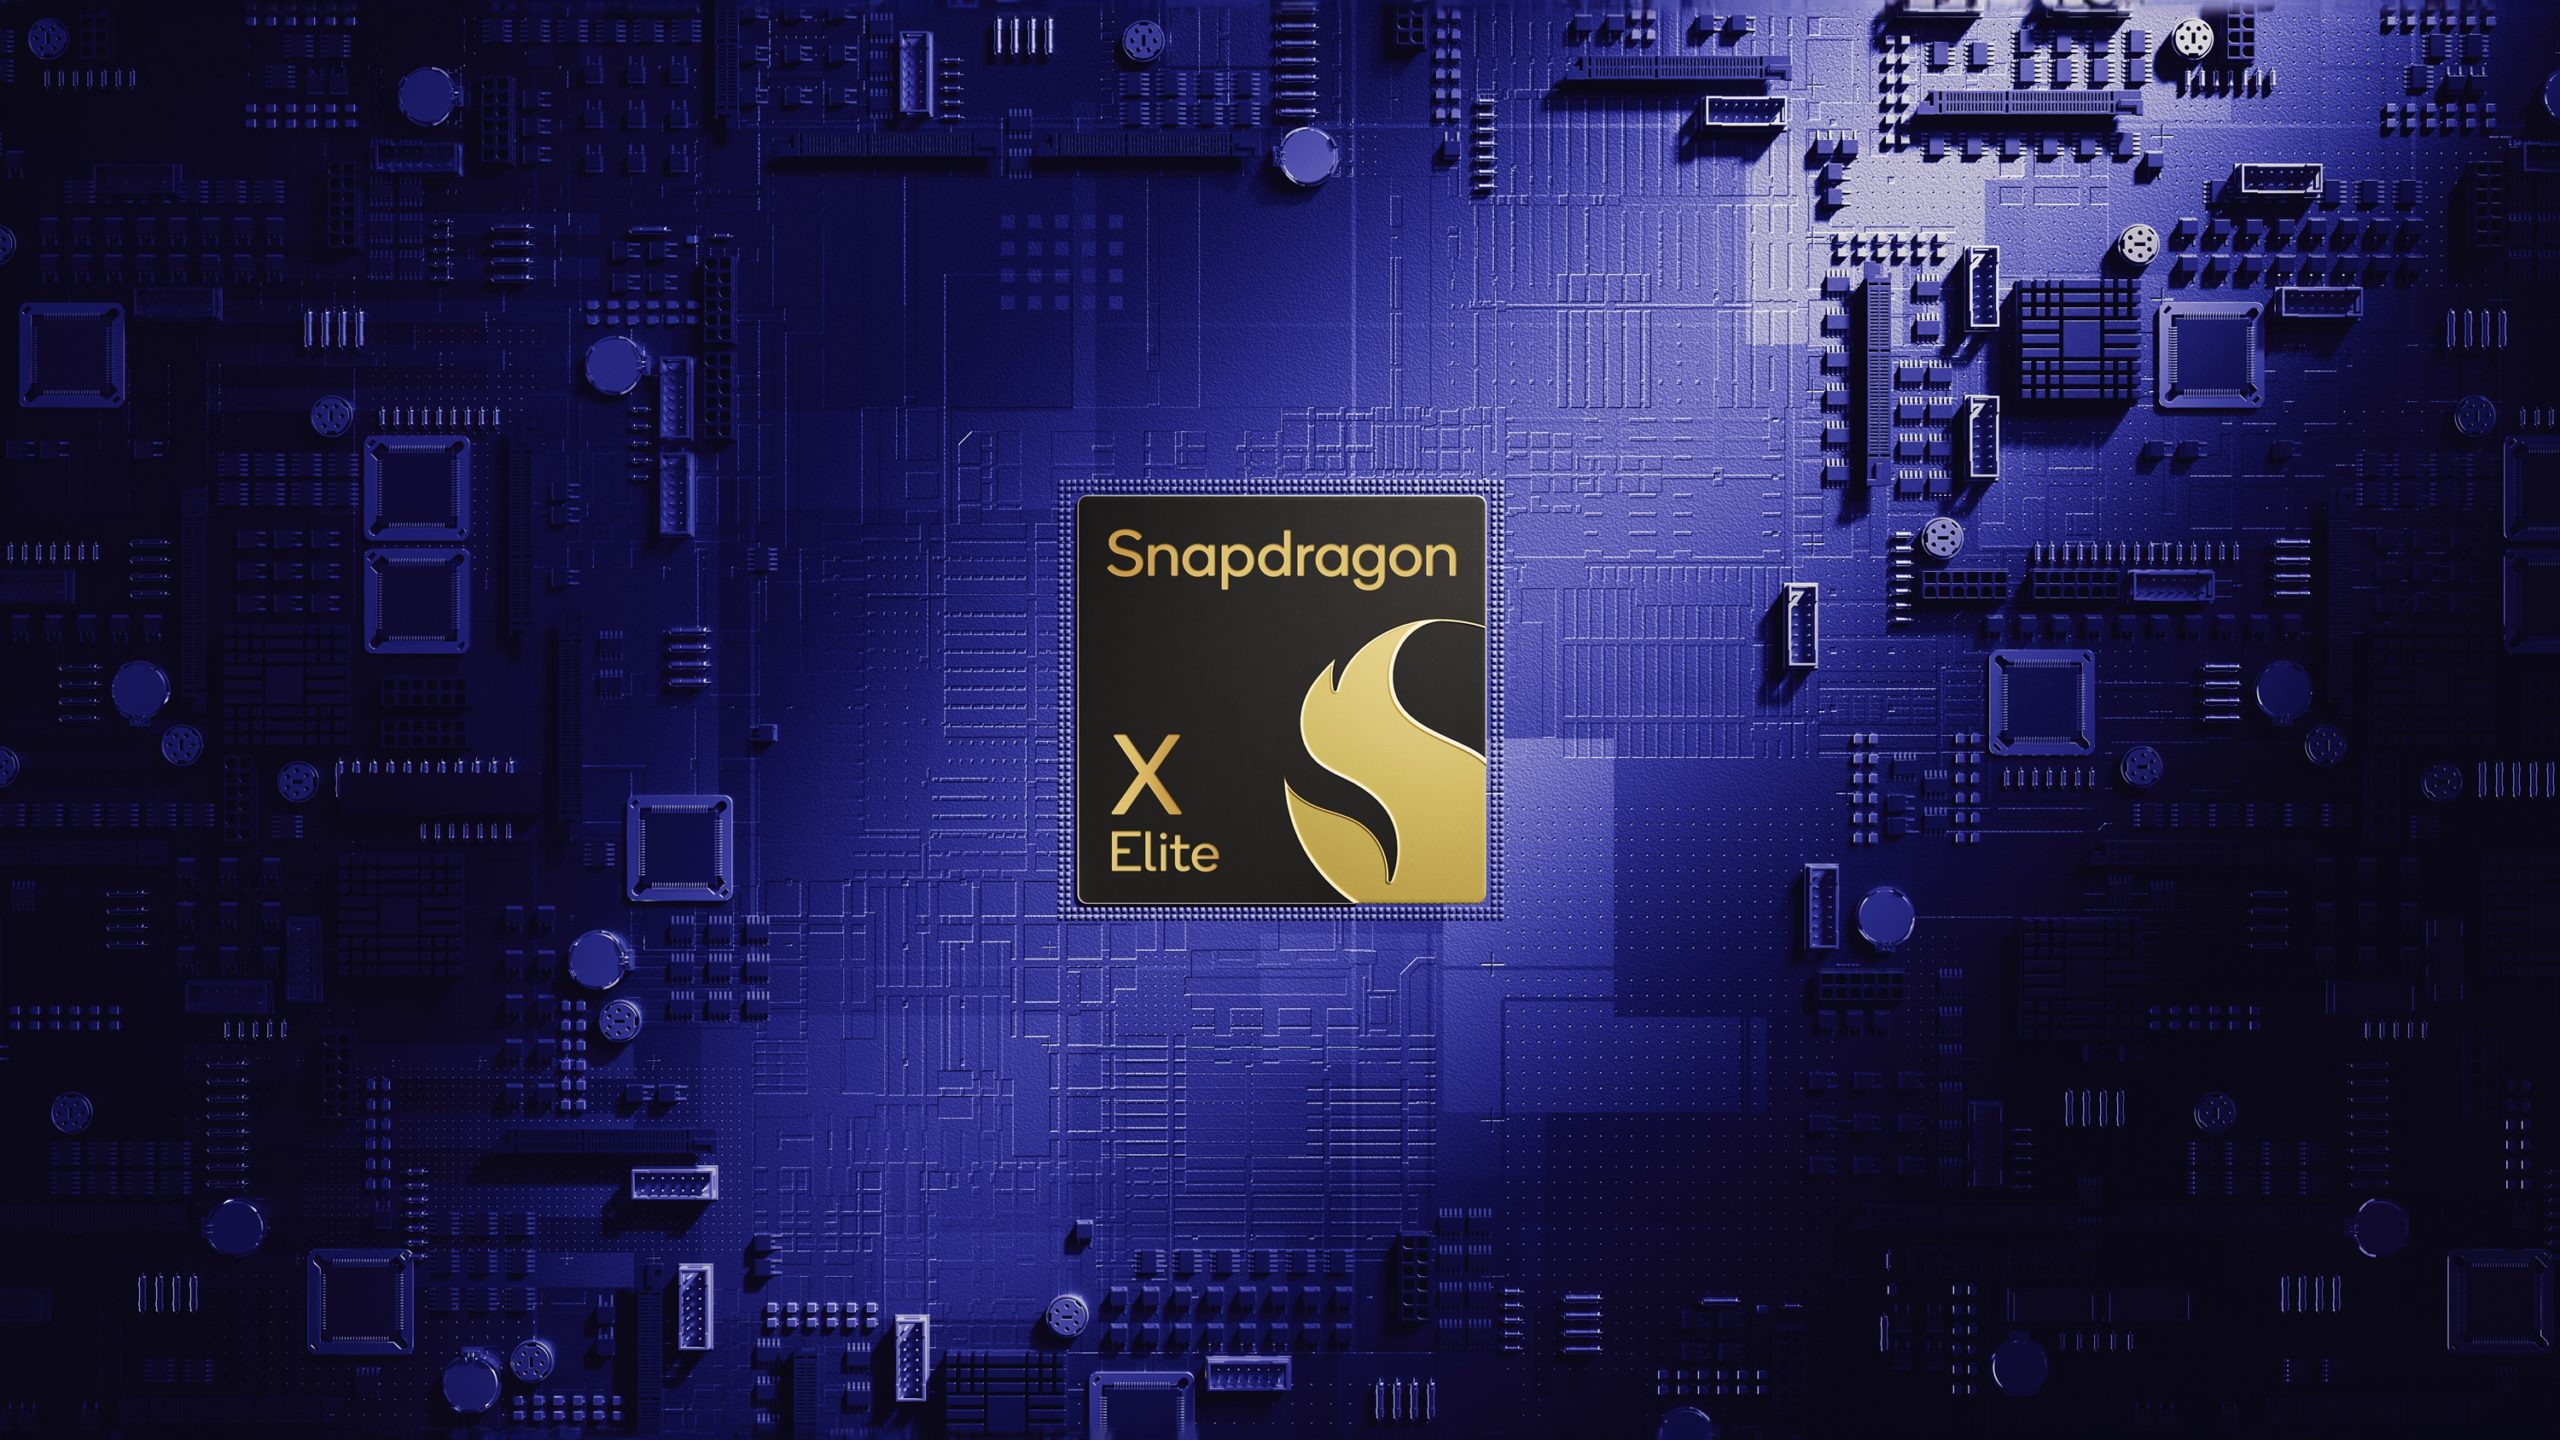 qualcomm-goes-where-apple-won’t,-readies-official-linux-support-for-snapdragon-x-elite